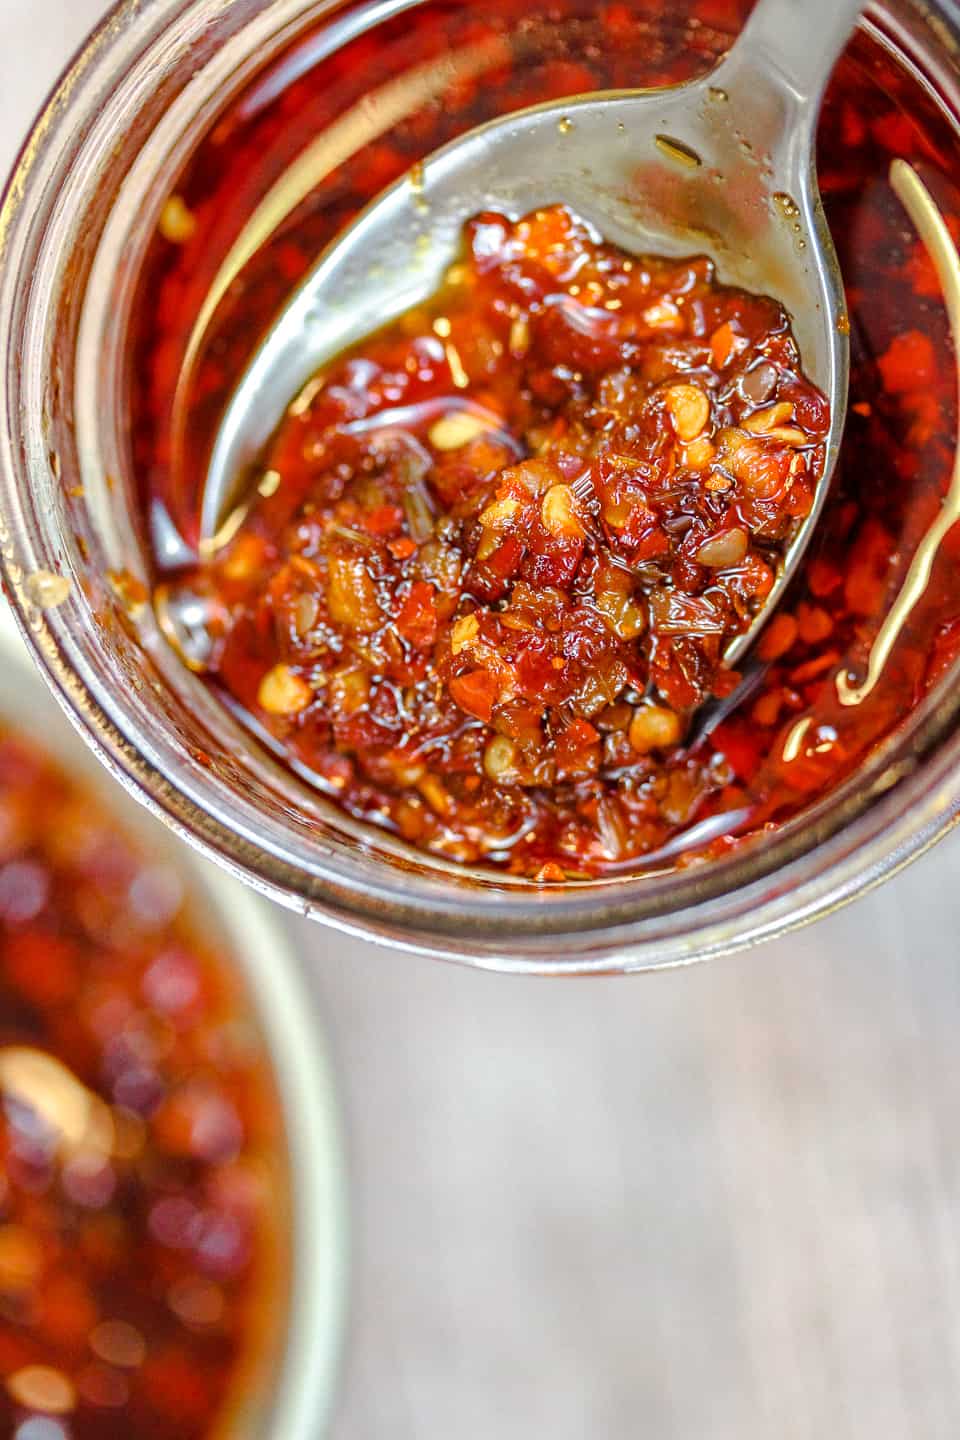 How to Make Chili Garlic Oil (Dipping or Finishing Oil)